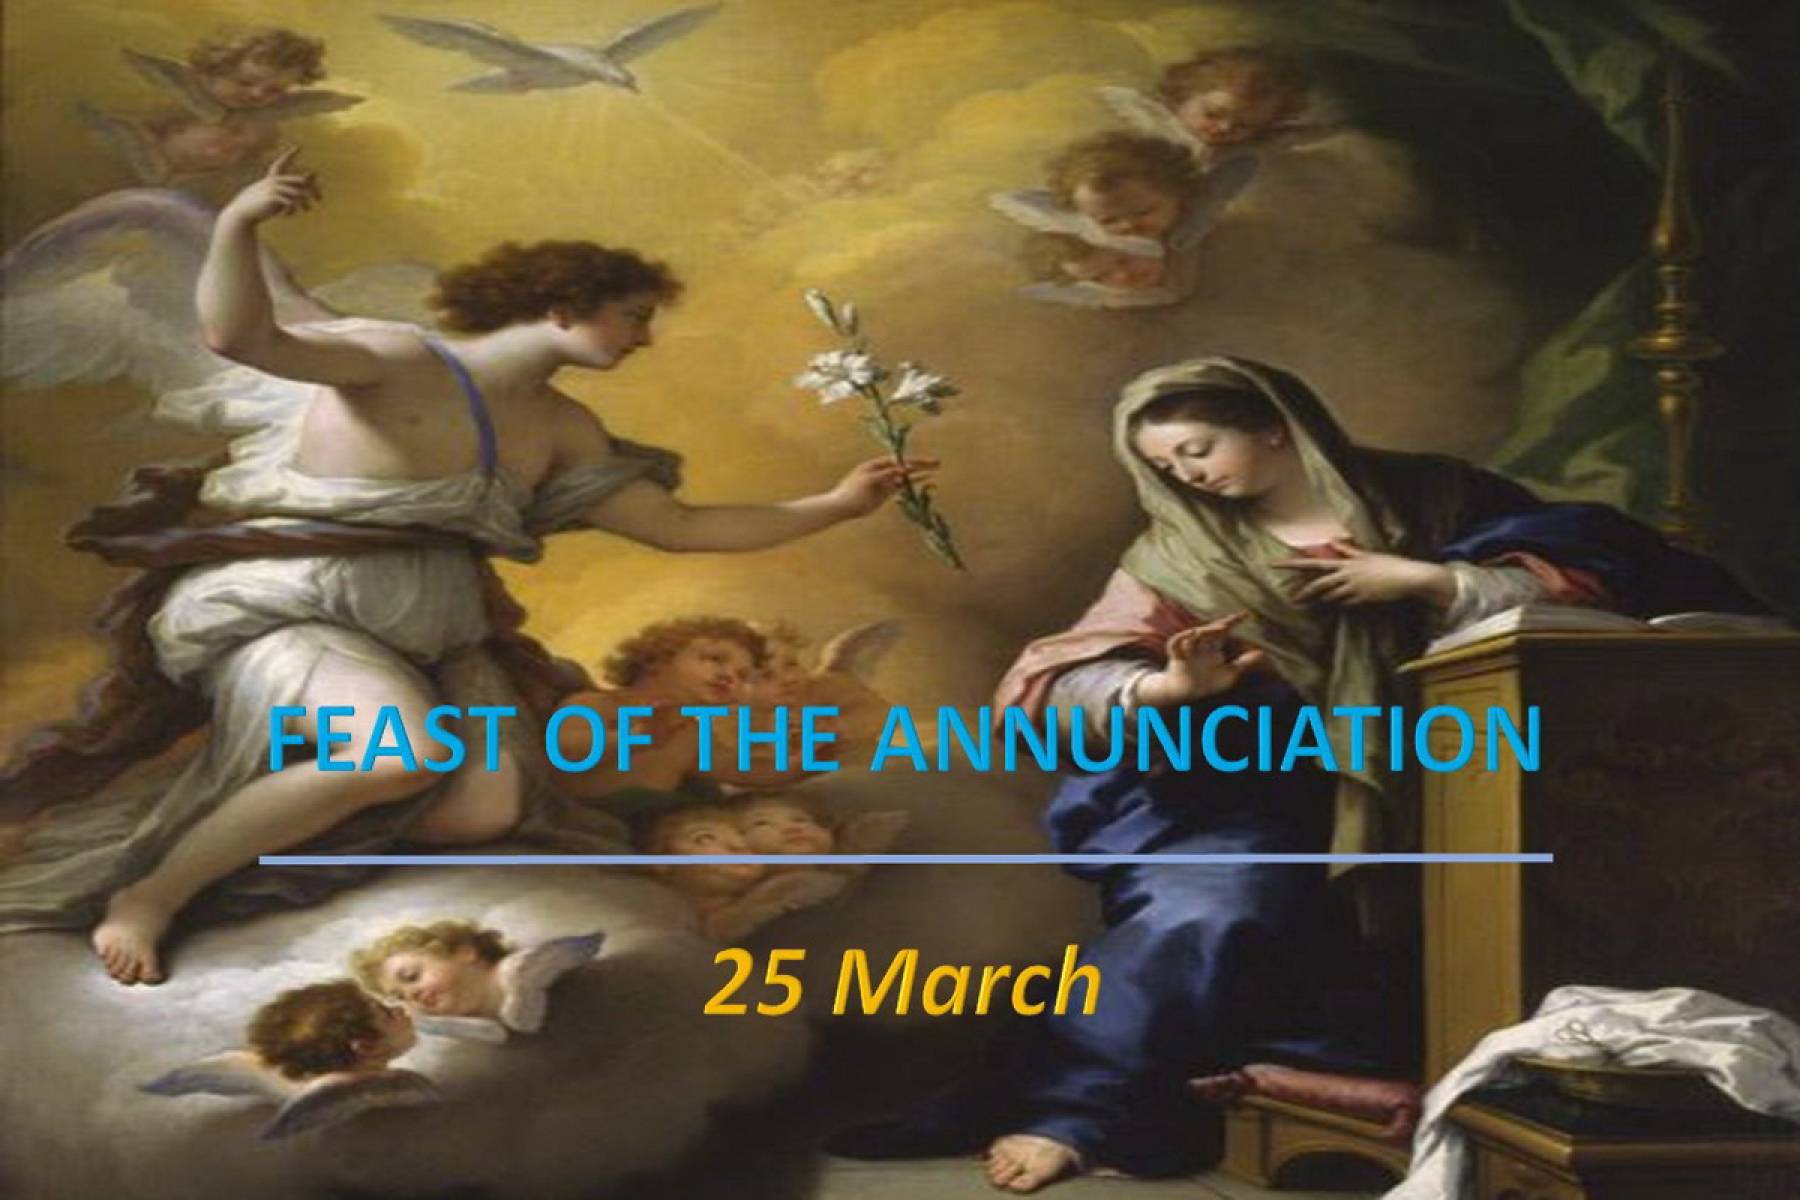 The Feast of the Annunciation, 25 March